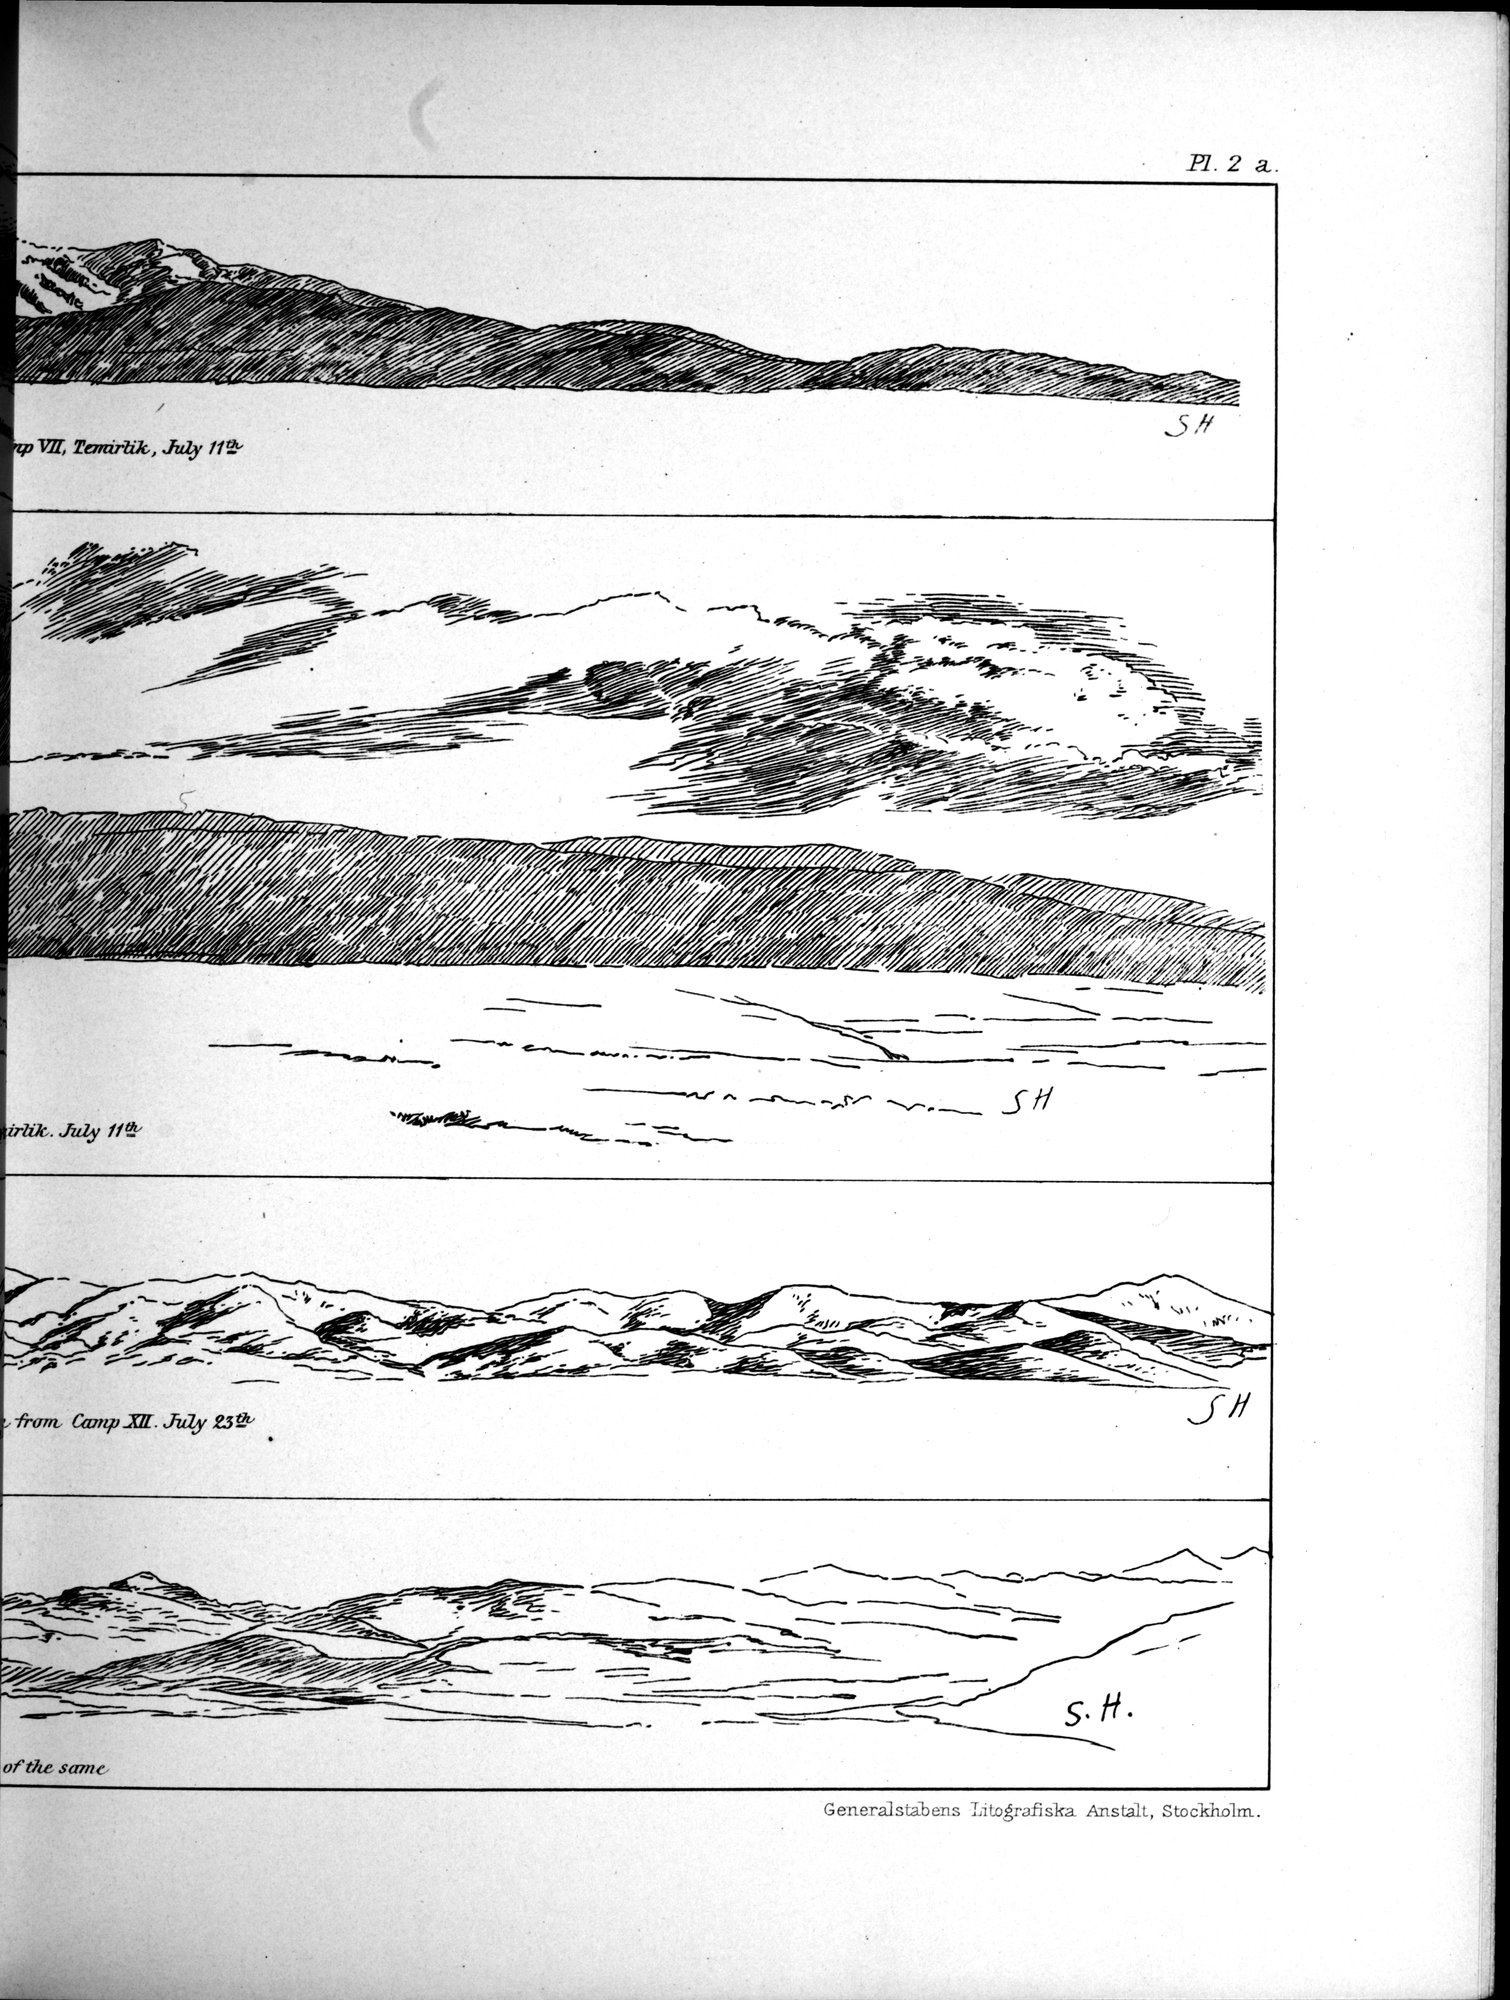 Scientific Results of a Journey in Central Asia, 1899-1902 : vol.3 / 53 ページ（白黒高解像度画像）